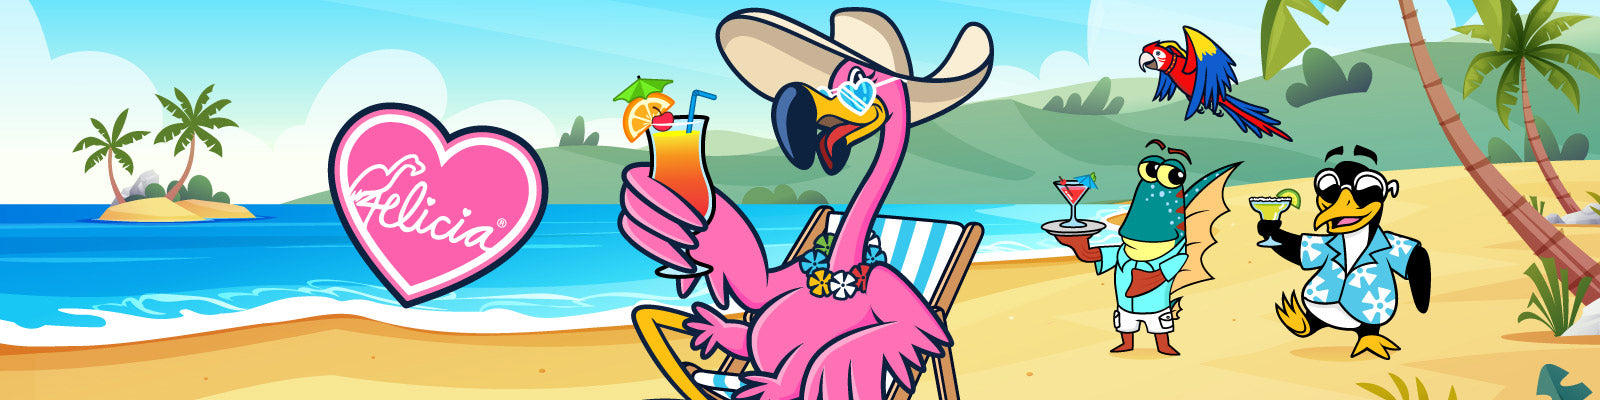 Felicia the Flamingo loves her friends & she drinks well with others. Shop Felicia's collection of tropical gear.